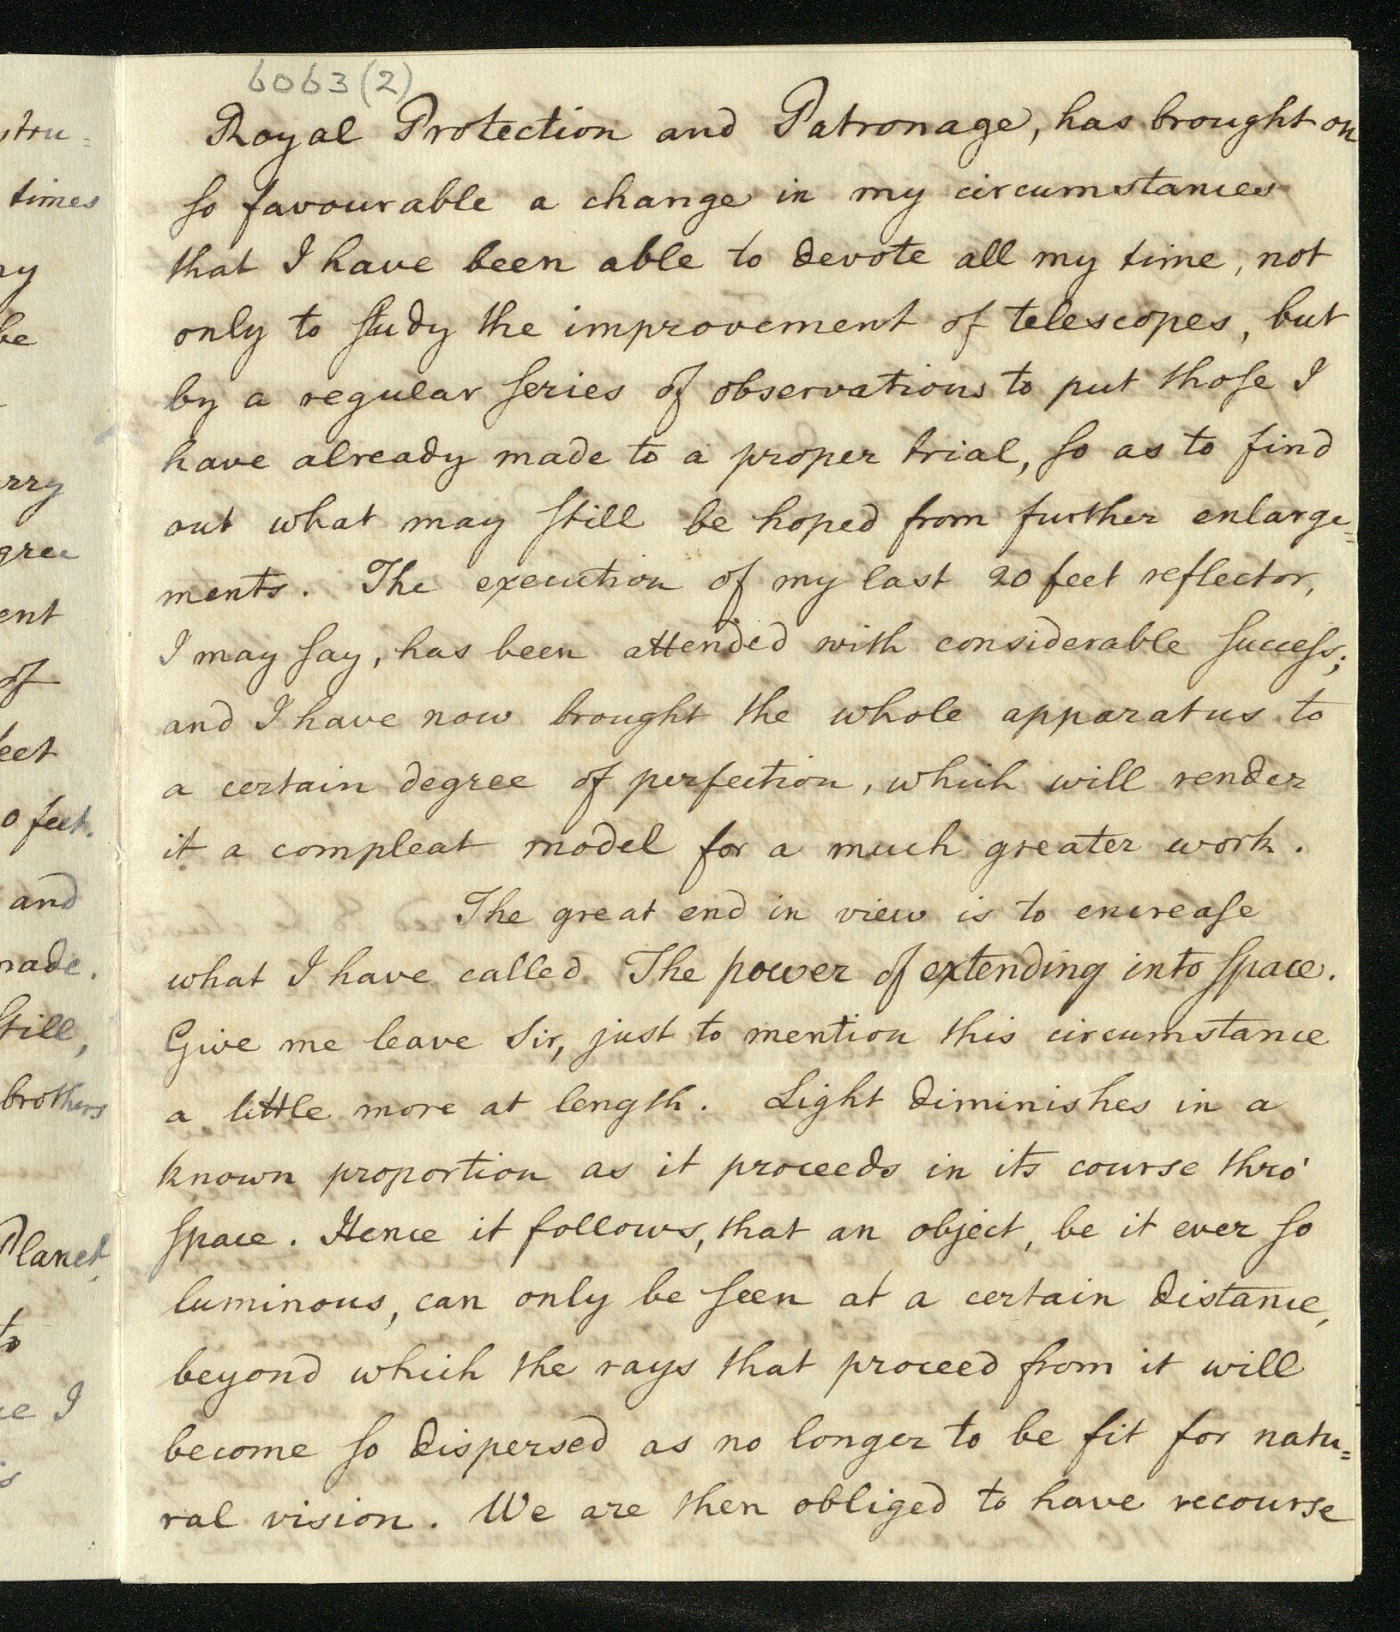 Letter from William Herschel to Sir Joseph Banks, with an estimate of the expenses required to build an enlarged telescope, page 3